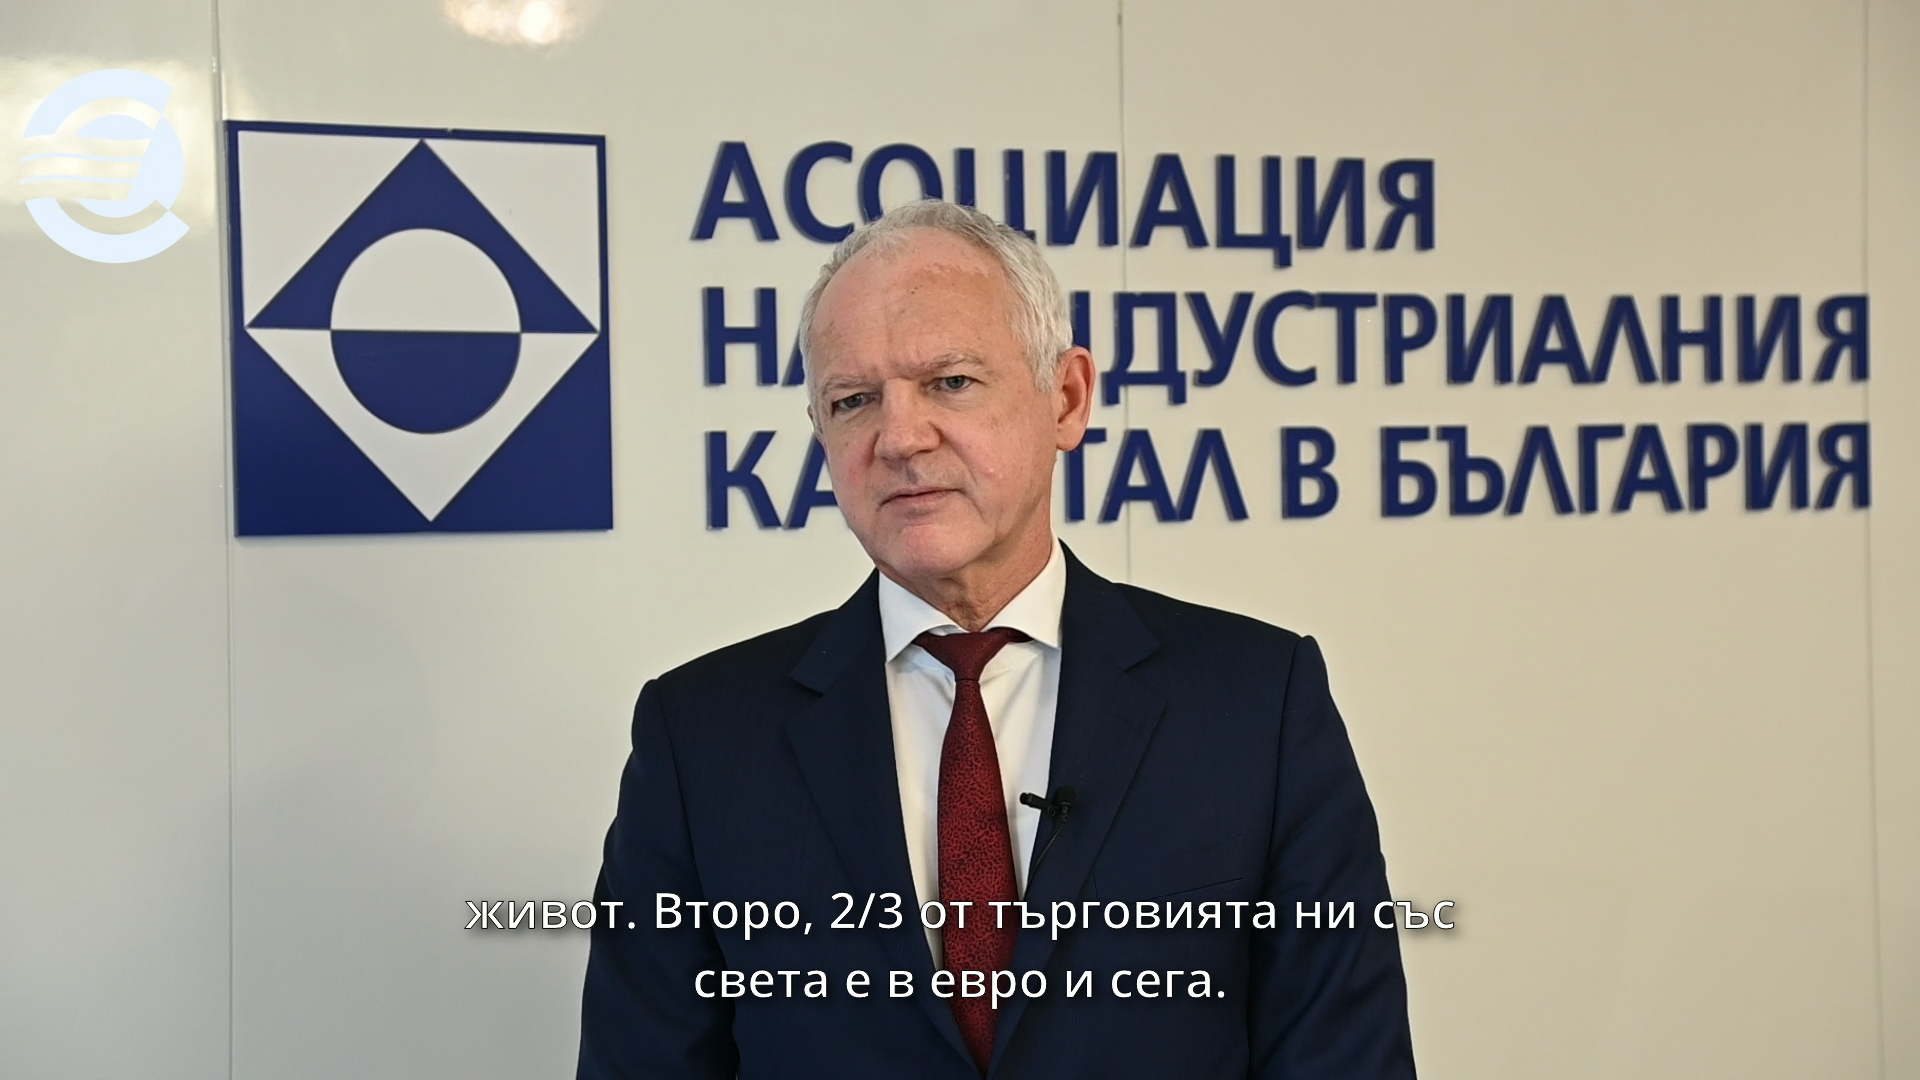 Vasil Velev, Chairman of the Board of the Industrial Capital Association of Bulgaria: The adoption of the euro in Bulgaria will lead to more investments